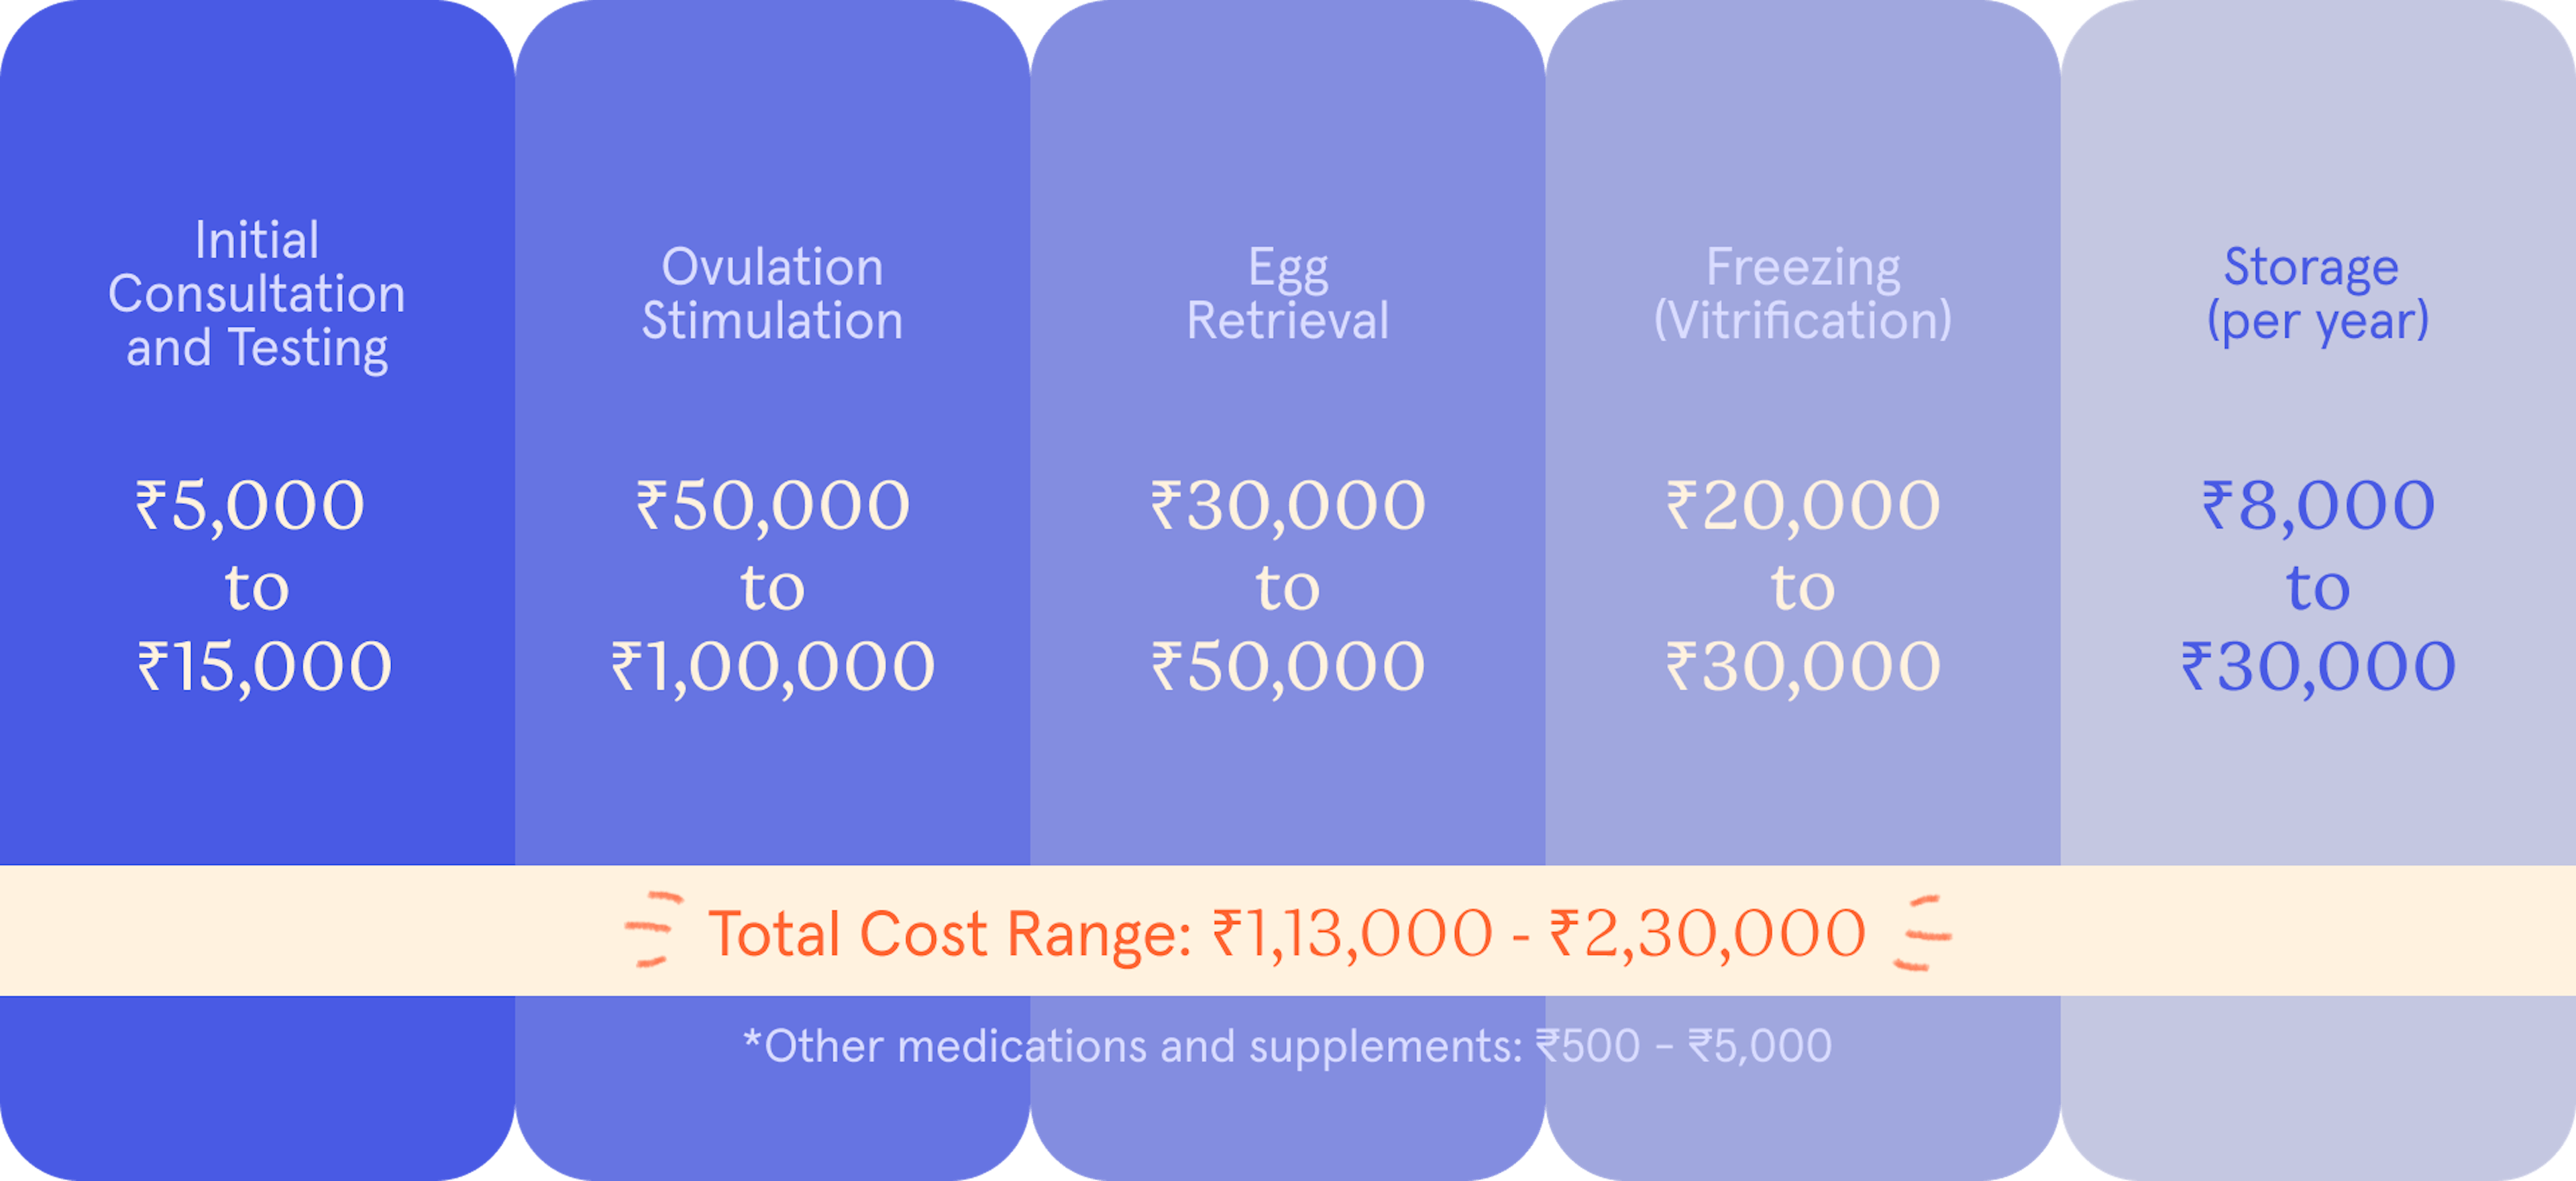 A visual representation of the cost breakdown of the egg freezing process